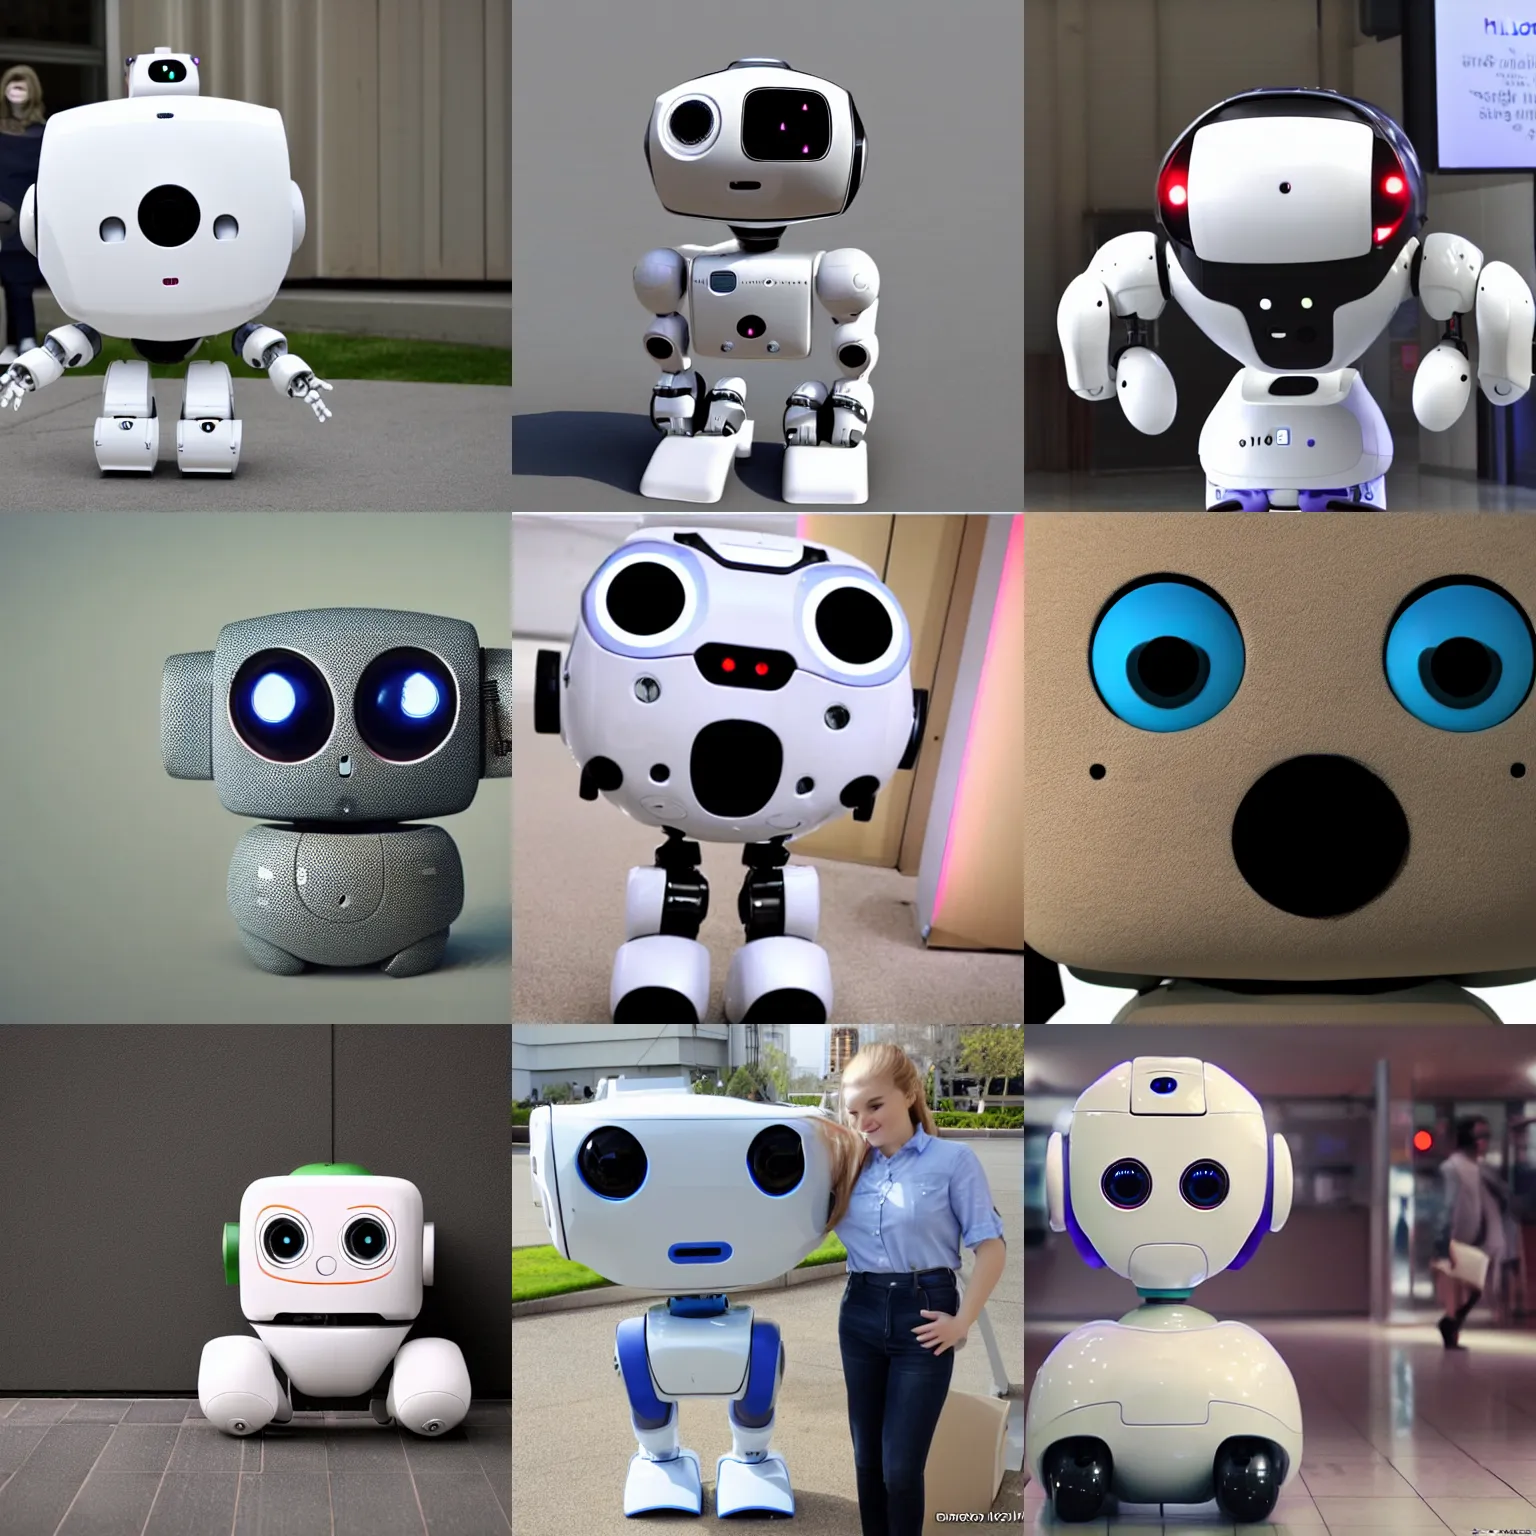 Prompt: sd: cute friendly huggable robot looks into the camera with huge adorable eyes>This robot keeps following me